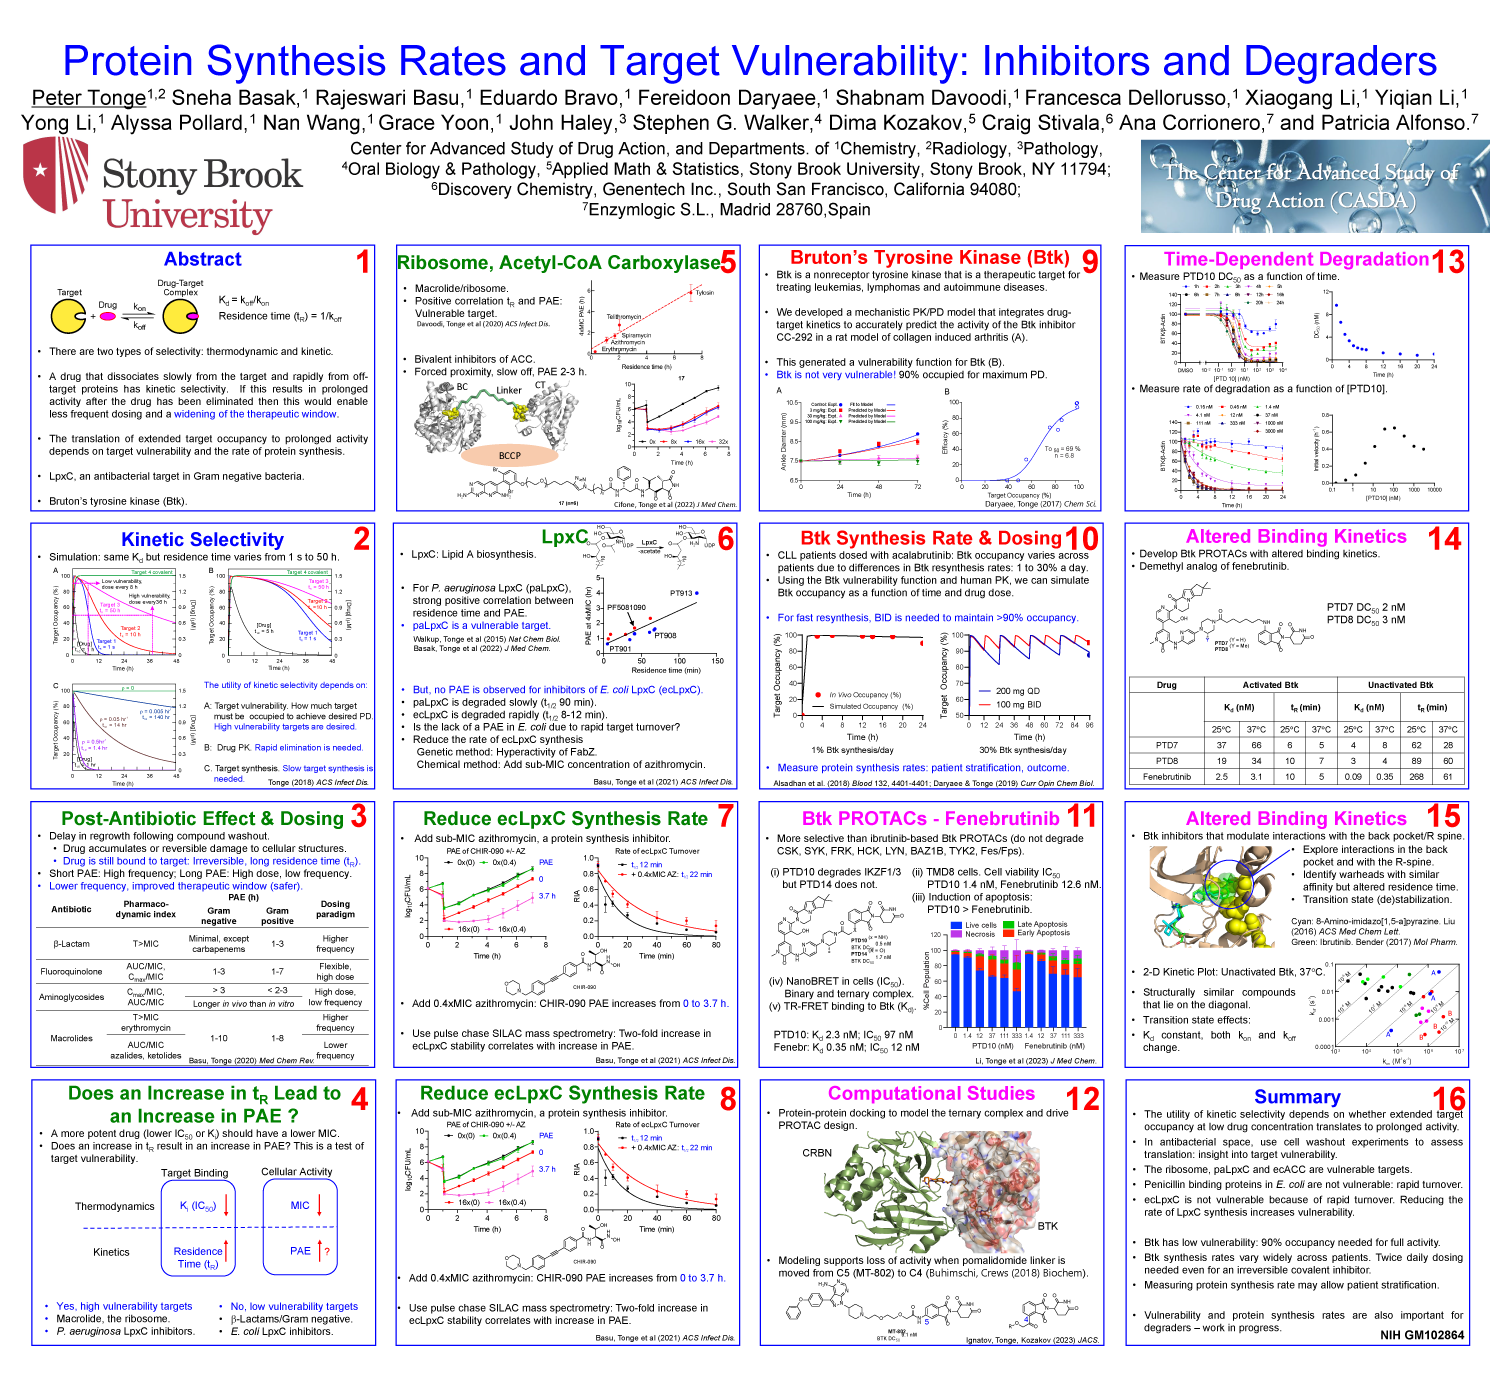 Protein Synthesis Rates and Target Vulnerability: Inhibitors and Degraders